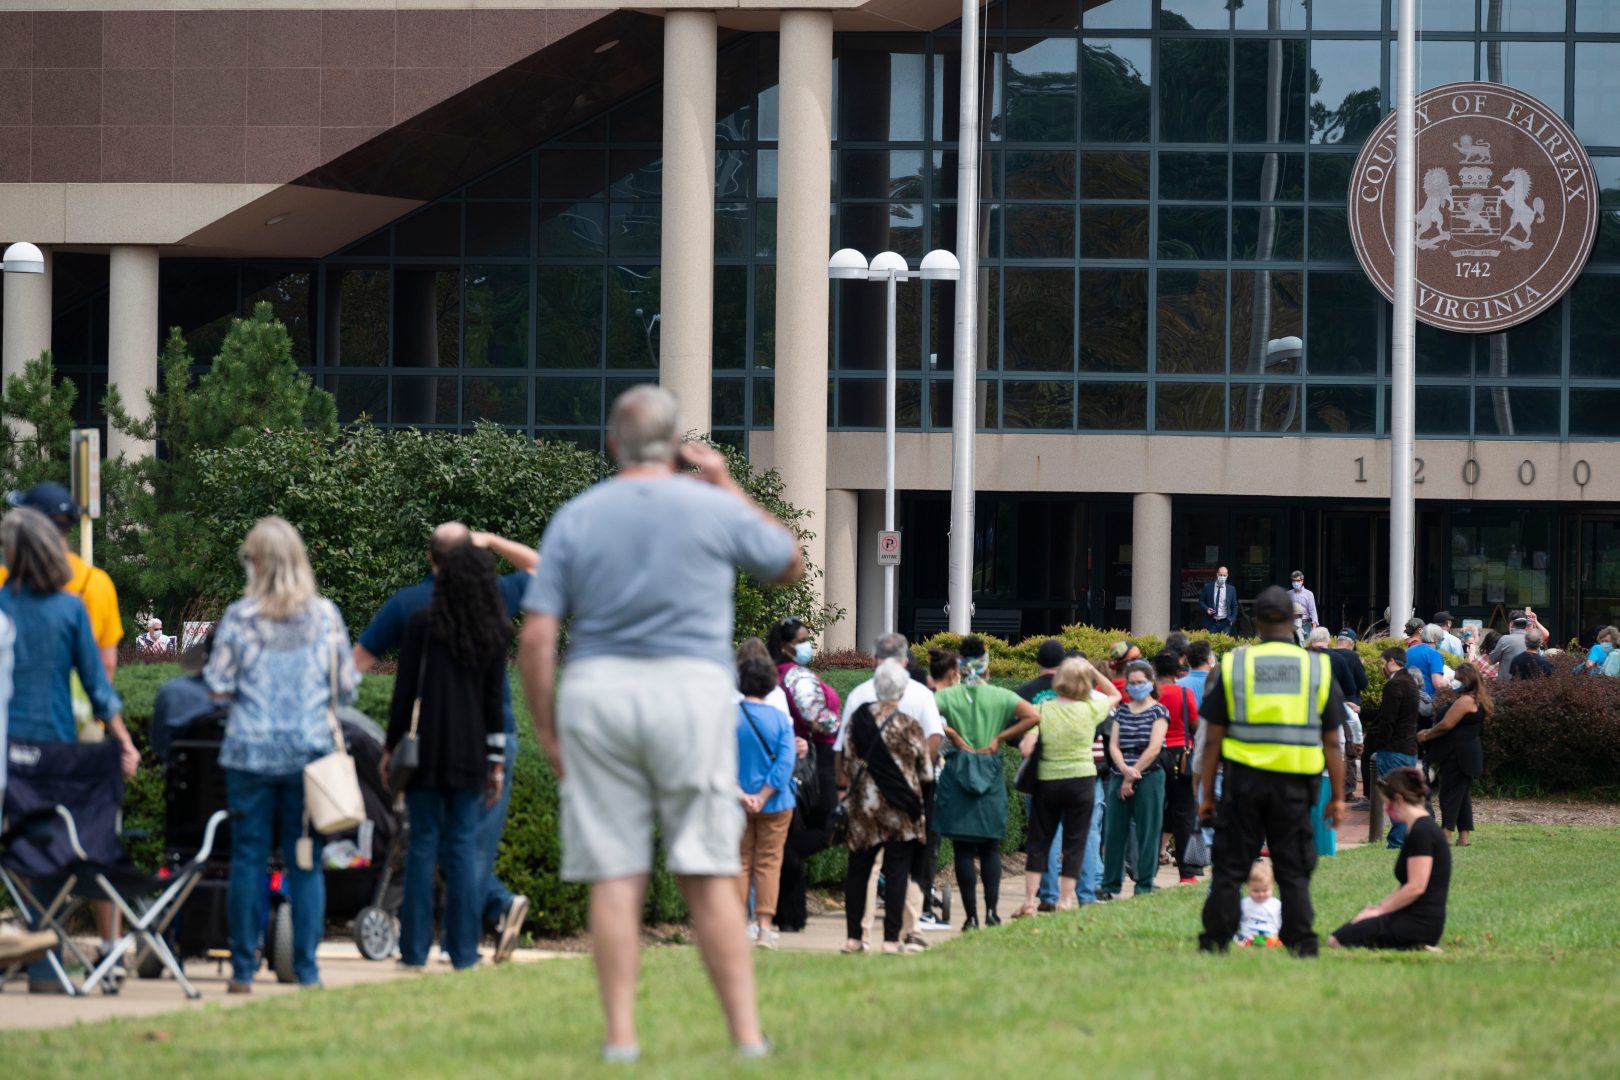 Voters wait in line to cast their ballot at an early voting location in Fairfax, Virginia on September 18, 2020. Growing tensions in the country have some election officials worried about potential violence at polling places.